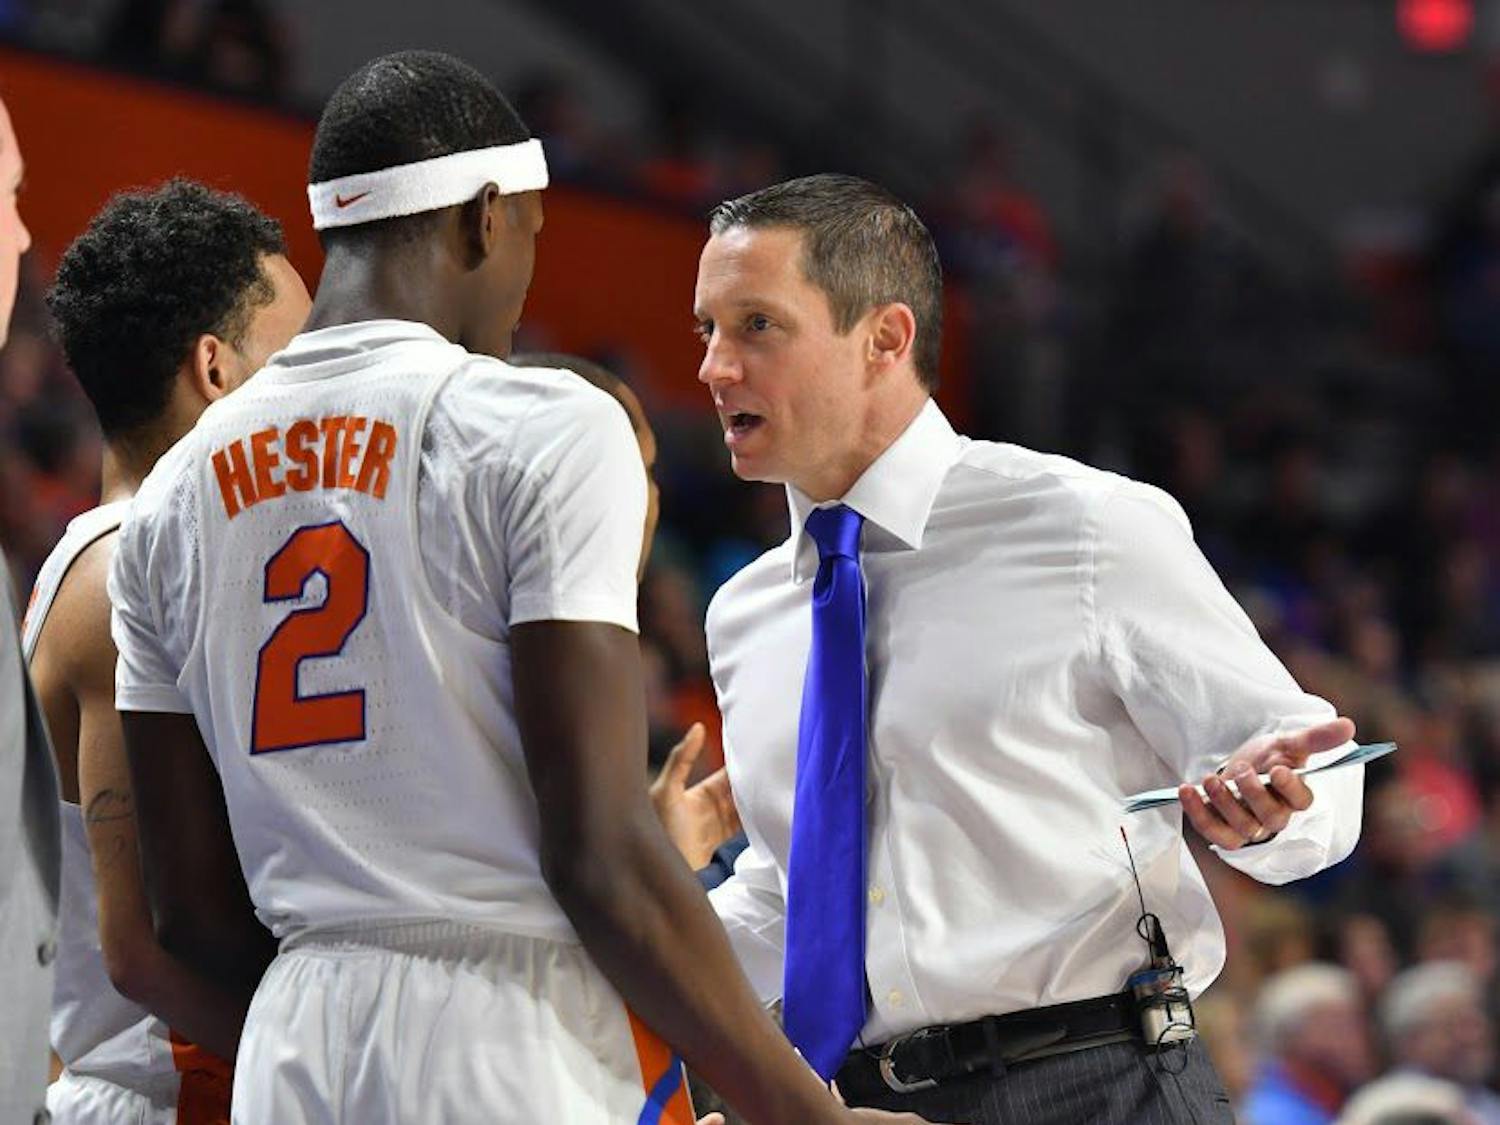 UF guard Eric Hester talks with coach Mike White during Florida's 94-71 win over the University of Arkansas at Little Rock on Dec. 21, 2016, in the O'Connell Center.